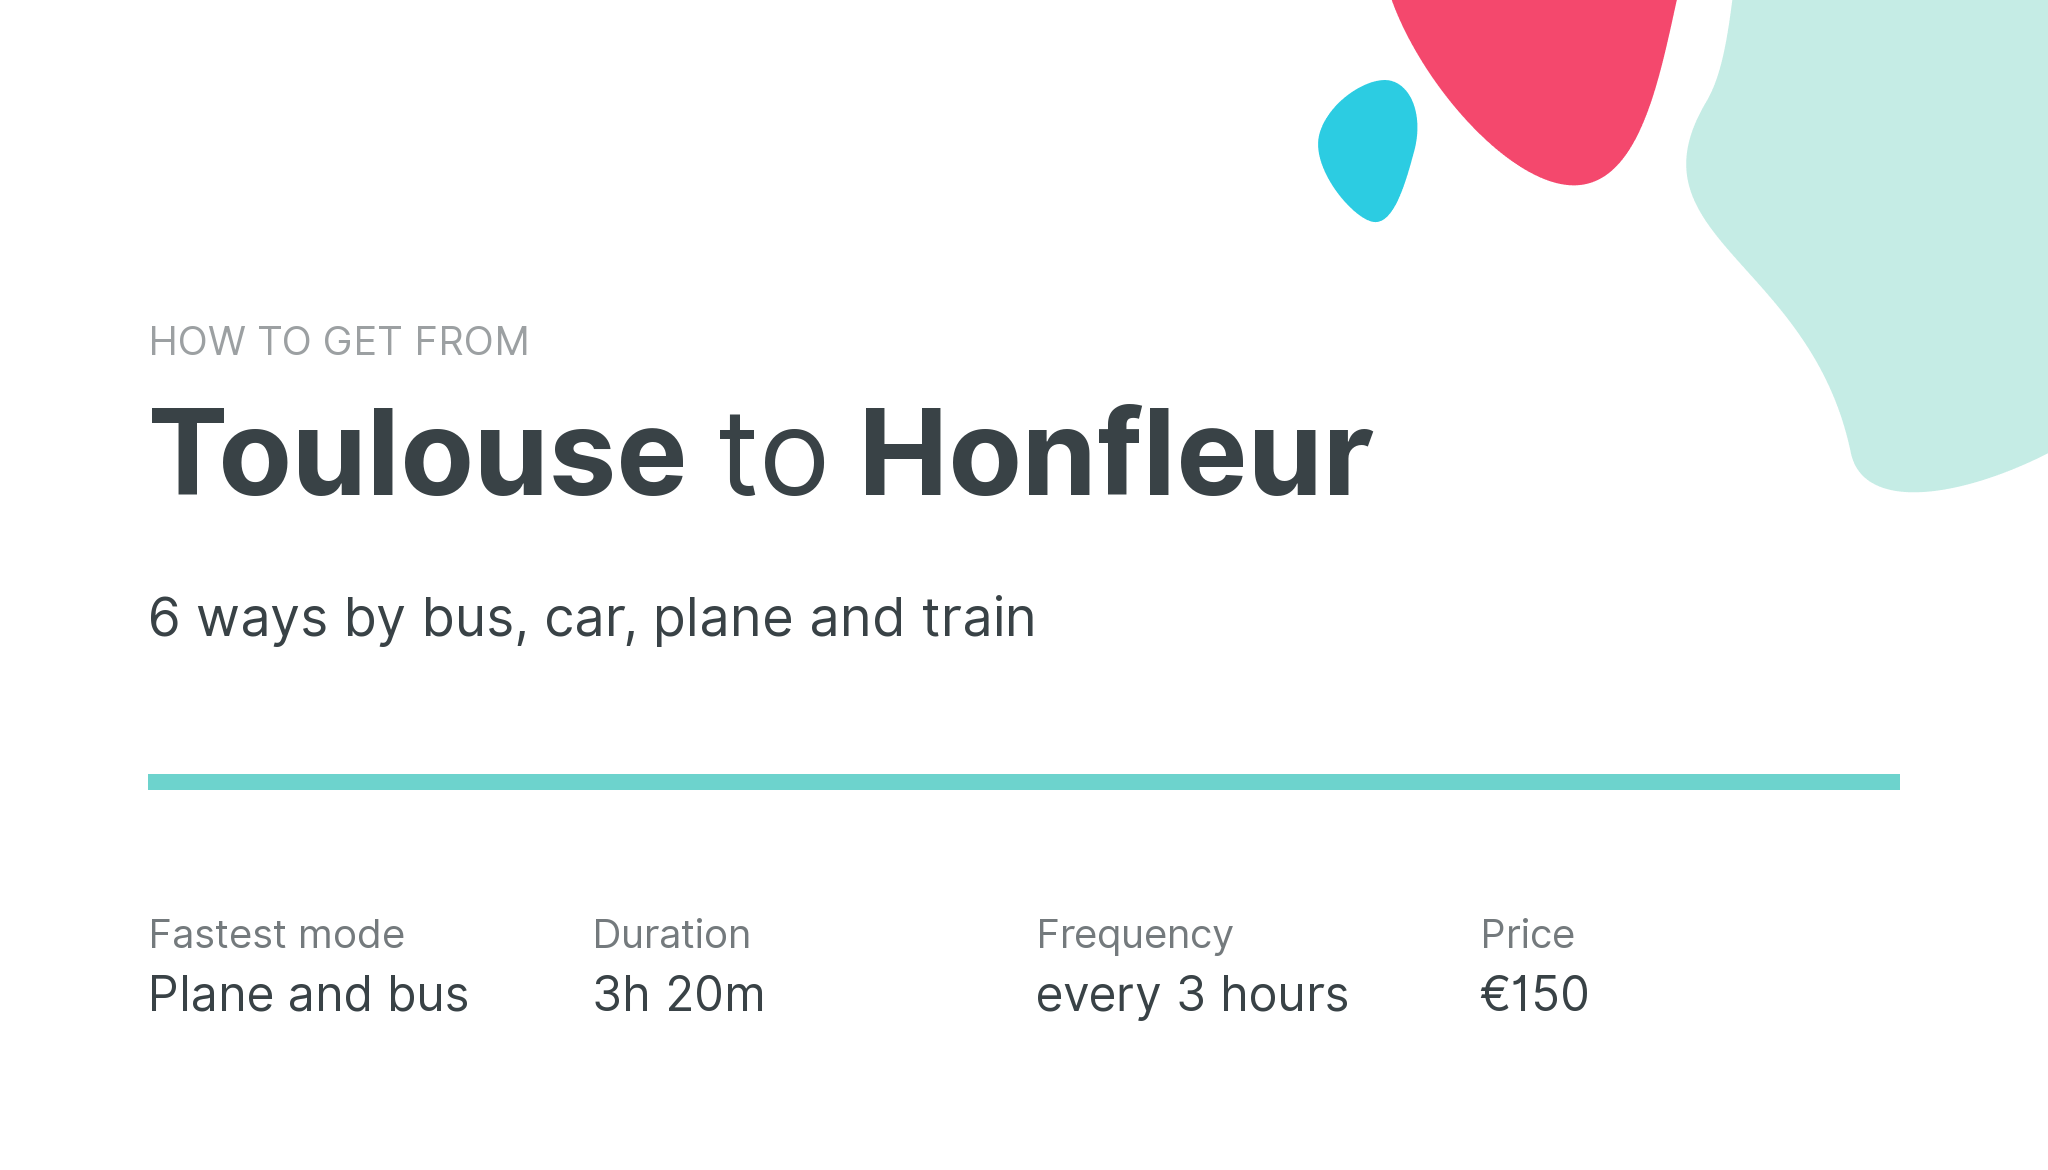 How do I get from Toulouse to Honfleur